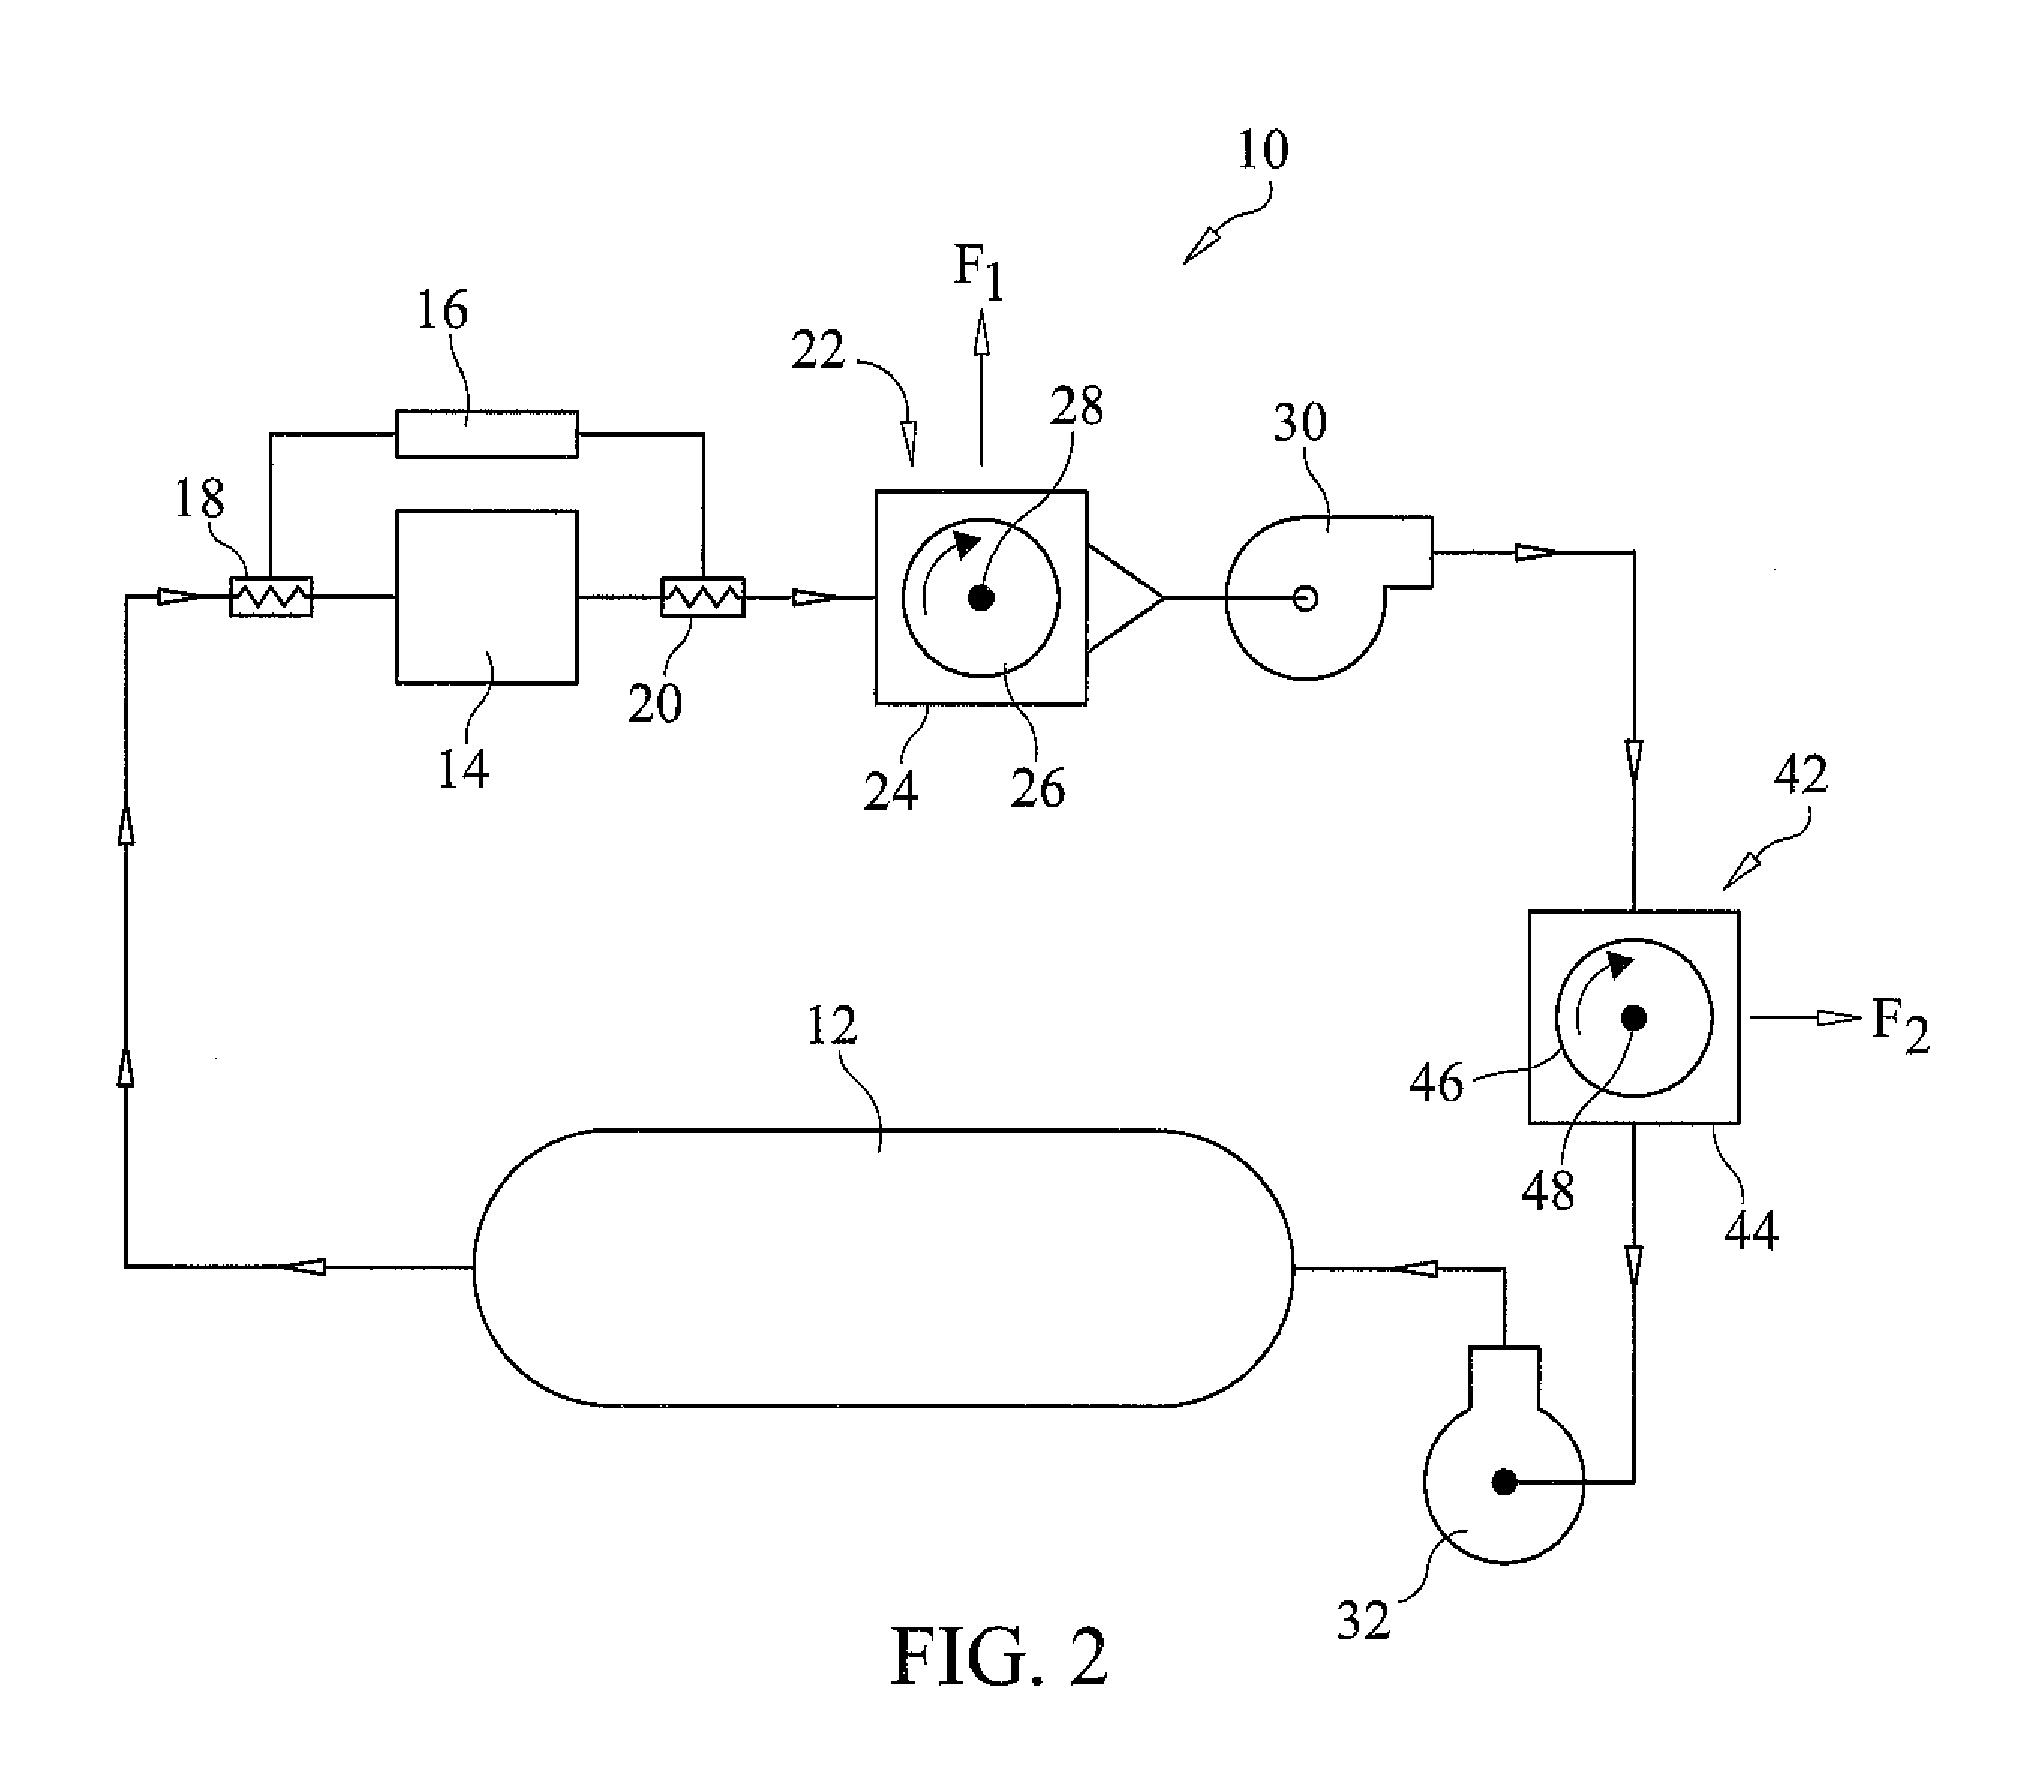 Compressed air vehicle having enhanced performance through use of magnus effect